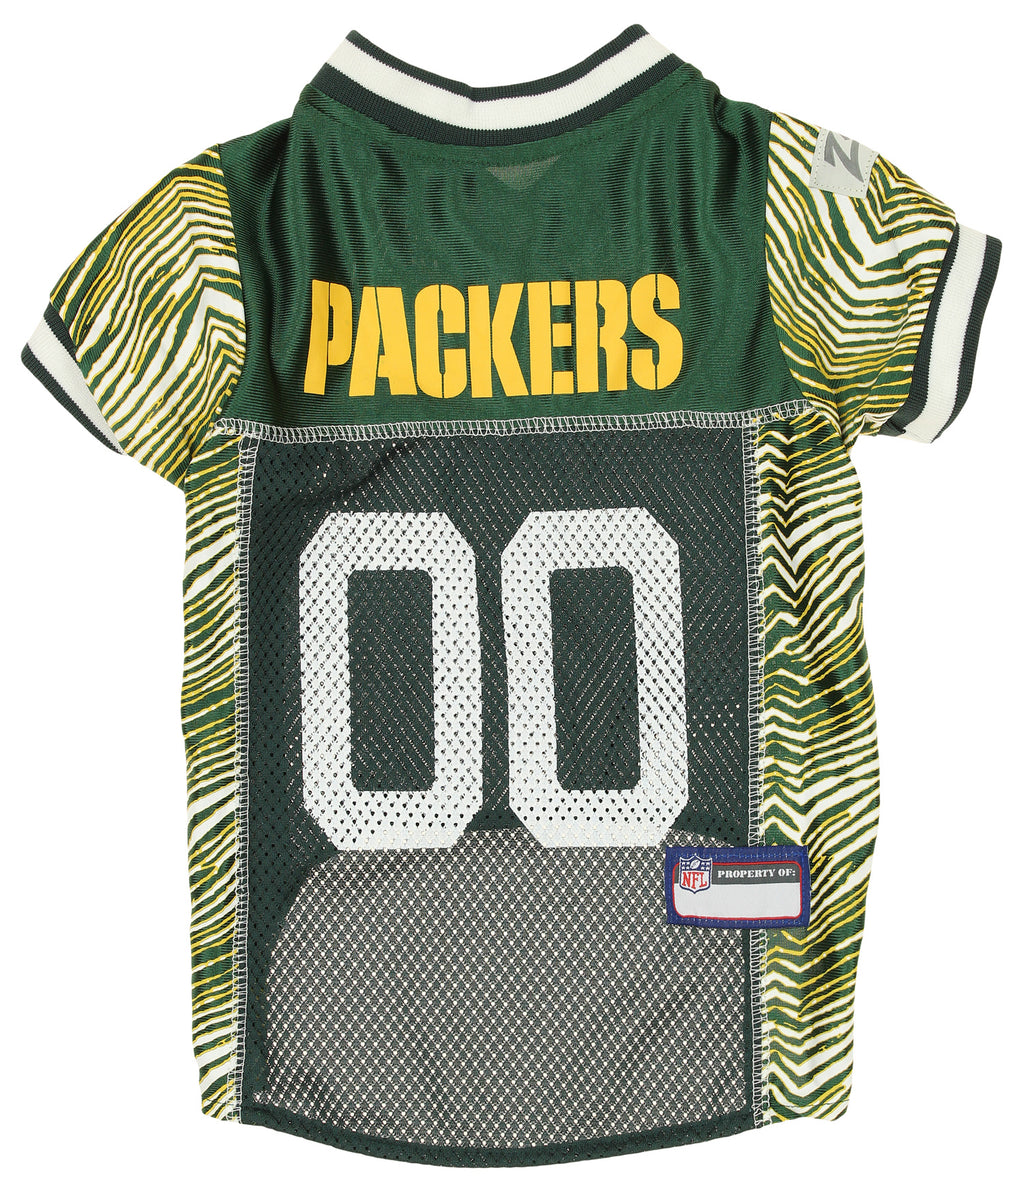 packers puppy jersey